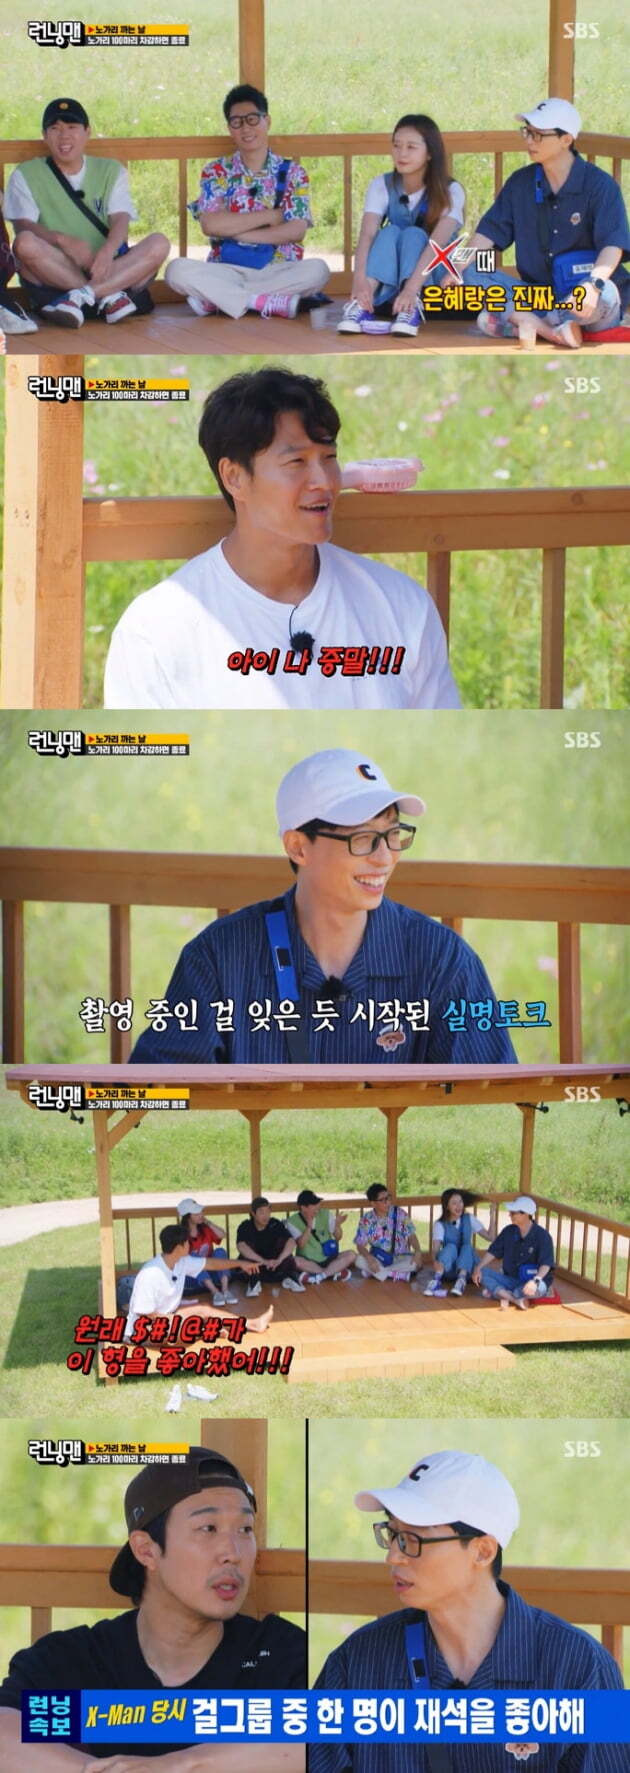 Running Man members have taken out talk instincts to their fullest.Running Man, which was broadcast on the last 4 days, was featured in We Gon Be Alright Day, and we conducted a race to deduct We Gon Be Alright, which was given to talk.Kim Jong-kook, who recently surpassed one million subscribers in two days after opening YouTube, said, I did not know that activists were hiding like this.Yoo Jae-Suk laughed, saying, Ji Suk-jin, Haha made a lot of efforts to increase the number of subscribers, but 1 million did not have a choice.Members have also begun to talk about entertainment X-Men, which is being re-broadcasted recently.Yoo Jae-Suk asked Kim Jong-kook, Was it real at X-Men? Kim Jong-kook said, Do not do it now!Jeon So-min expressed curiosity, saying, I am curious about the audience.Yoo Jae-Suk smiled at his popularity at the time, saying, There were a lot of them. Haha said, Can I confess shock? At that time, one girl group member liked my brother.I am married now and I live well. Yoo Jae-Suk said, I have never been dashed in my life. The members Running Man casting story was also revealed. Yoo Jae-Suk said of Ji Suk-jin, PD said how is Sukjin?I was surprised that there was a brother in the candidate group. Ji Suk-jin said, I was a college at the time. I did not know that membership was so important because I did not do real variety at the time.Yoo Jae-Suk said, Suk Jin-hyung had some heart wounds at that time. He talked about Haha. He said that a little child was too dark.Song Ji-hyo told me of his misconceptions about Kwangsoo early in Running Man: The female member was me then, so when we got together, I couldnt easily fit in.Kwangsoo kept calling and telling me to come out, so I thought Kwangsoo was hitting it. I was so irritated that I hung up not to call.From then on, Kwangsoo did not get a call. Kim Jong-kook and Yoo Jae-Suk revealed that Ji Suk-jin had actively changed his attitude to the program after the Thailand overseas fan meeting.Kim Jong-kook said, Ive been really keen since my brother Seok-jin went to an overseas fan meeting. Yoo Jae-Suk also said, Thats right.I was surprised at the shooting of Running Man Thailand, which was determined to be the last, and I thought it was a secret car after seeing the welcome crowd. Jeon So-min recently said of Thumbnam: I came across and walked, I was active, so I asked to walk home together. I walked too long.I said, My sister is going at the stop, he surprised everyone by revealing that he was younger.Since then, we have been playing games such as doppelganger tug-of-war, acupressure pain, and upgrade solidarity responsibility quiz to deduct members We Gon Be Right.The members deducted all We Gonbe Alright and Haha and Yang Se-chan were selected as penalties.